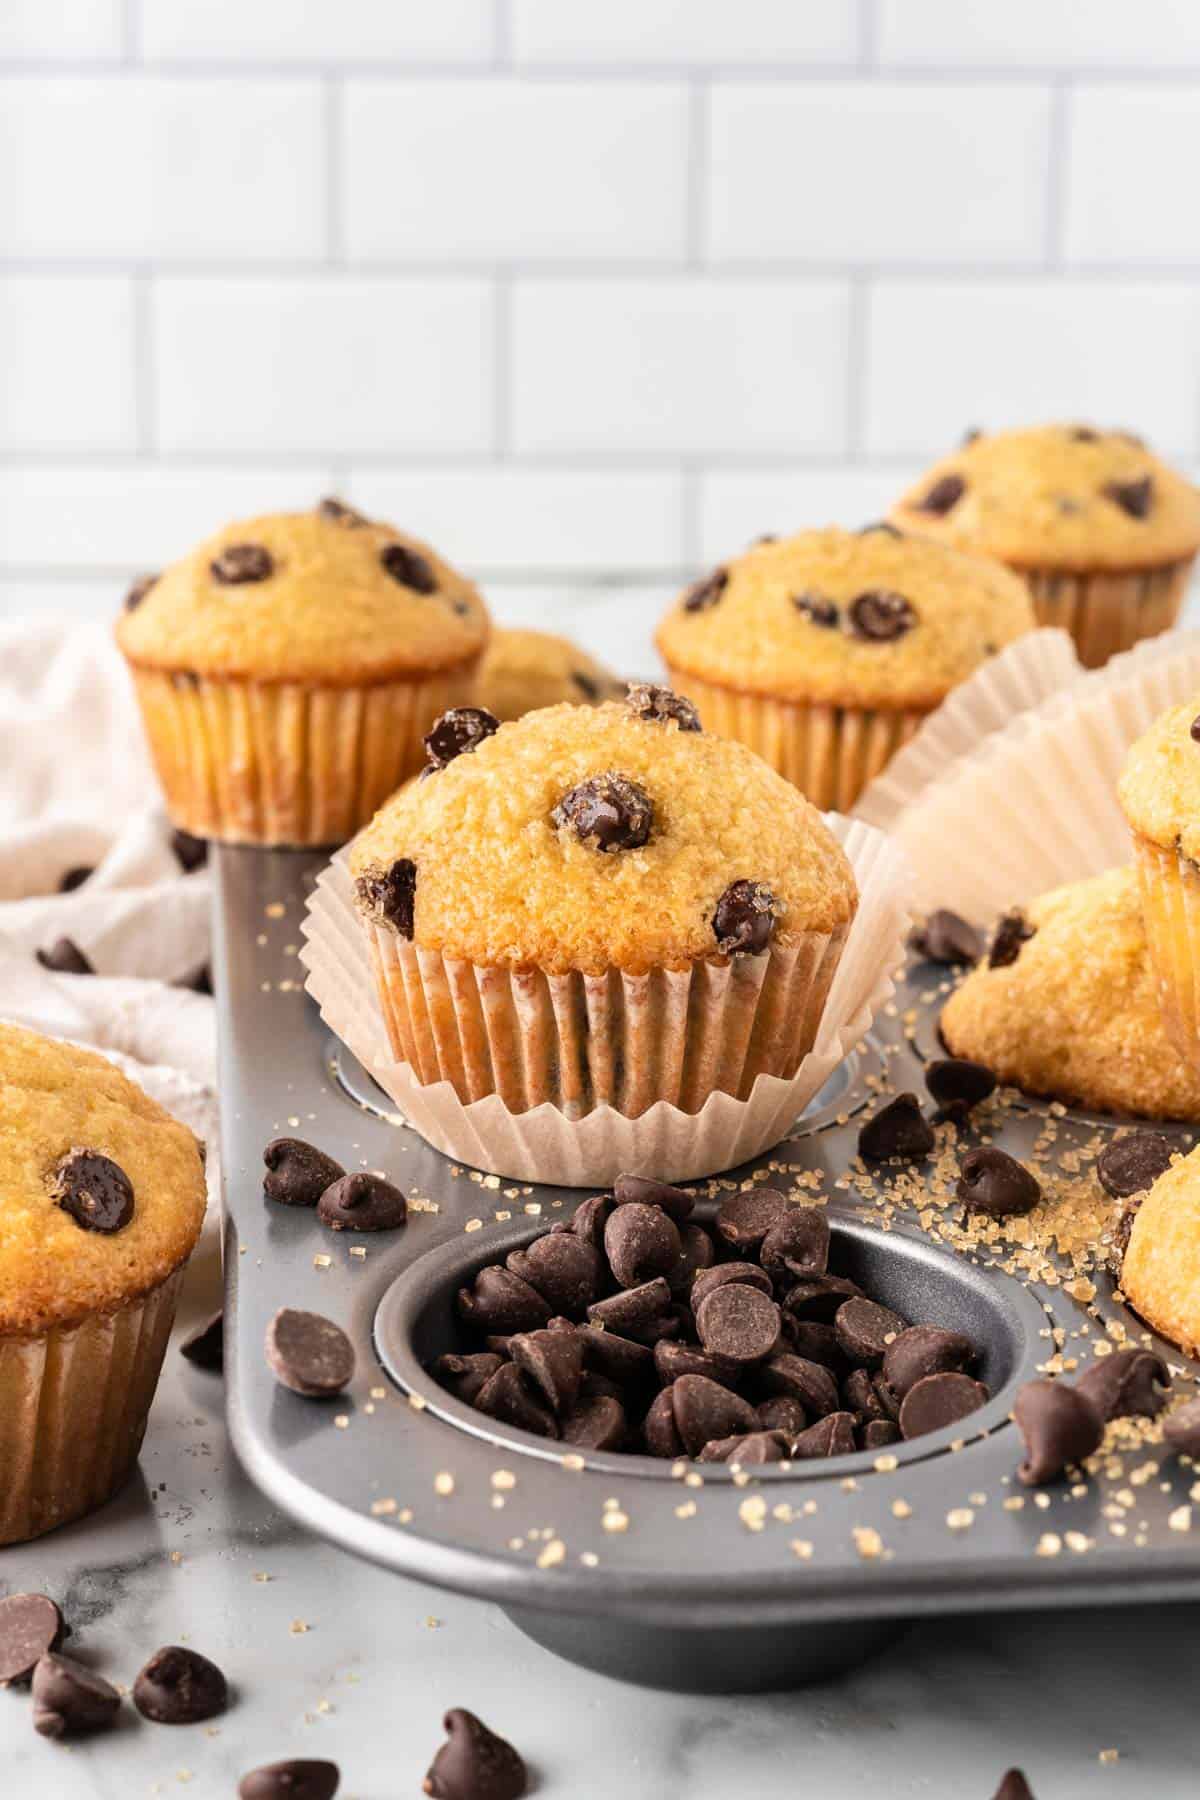 bakery style chocolate chip muffin